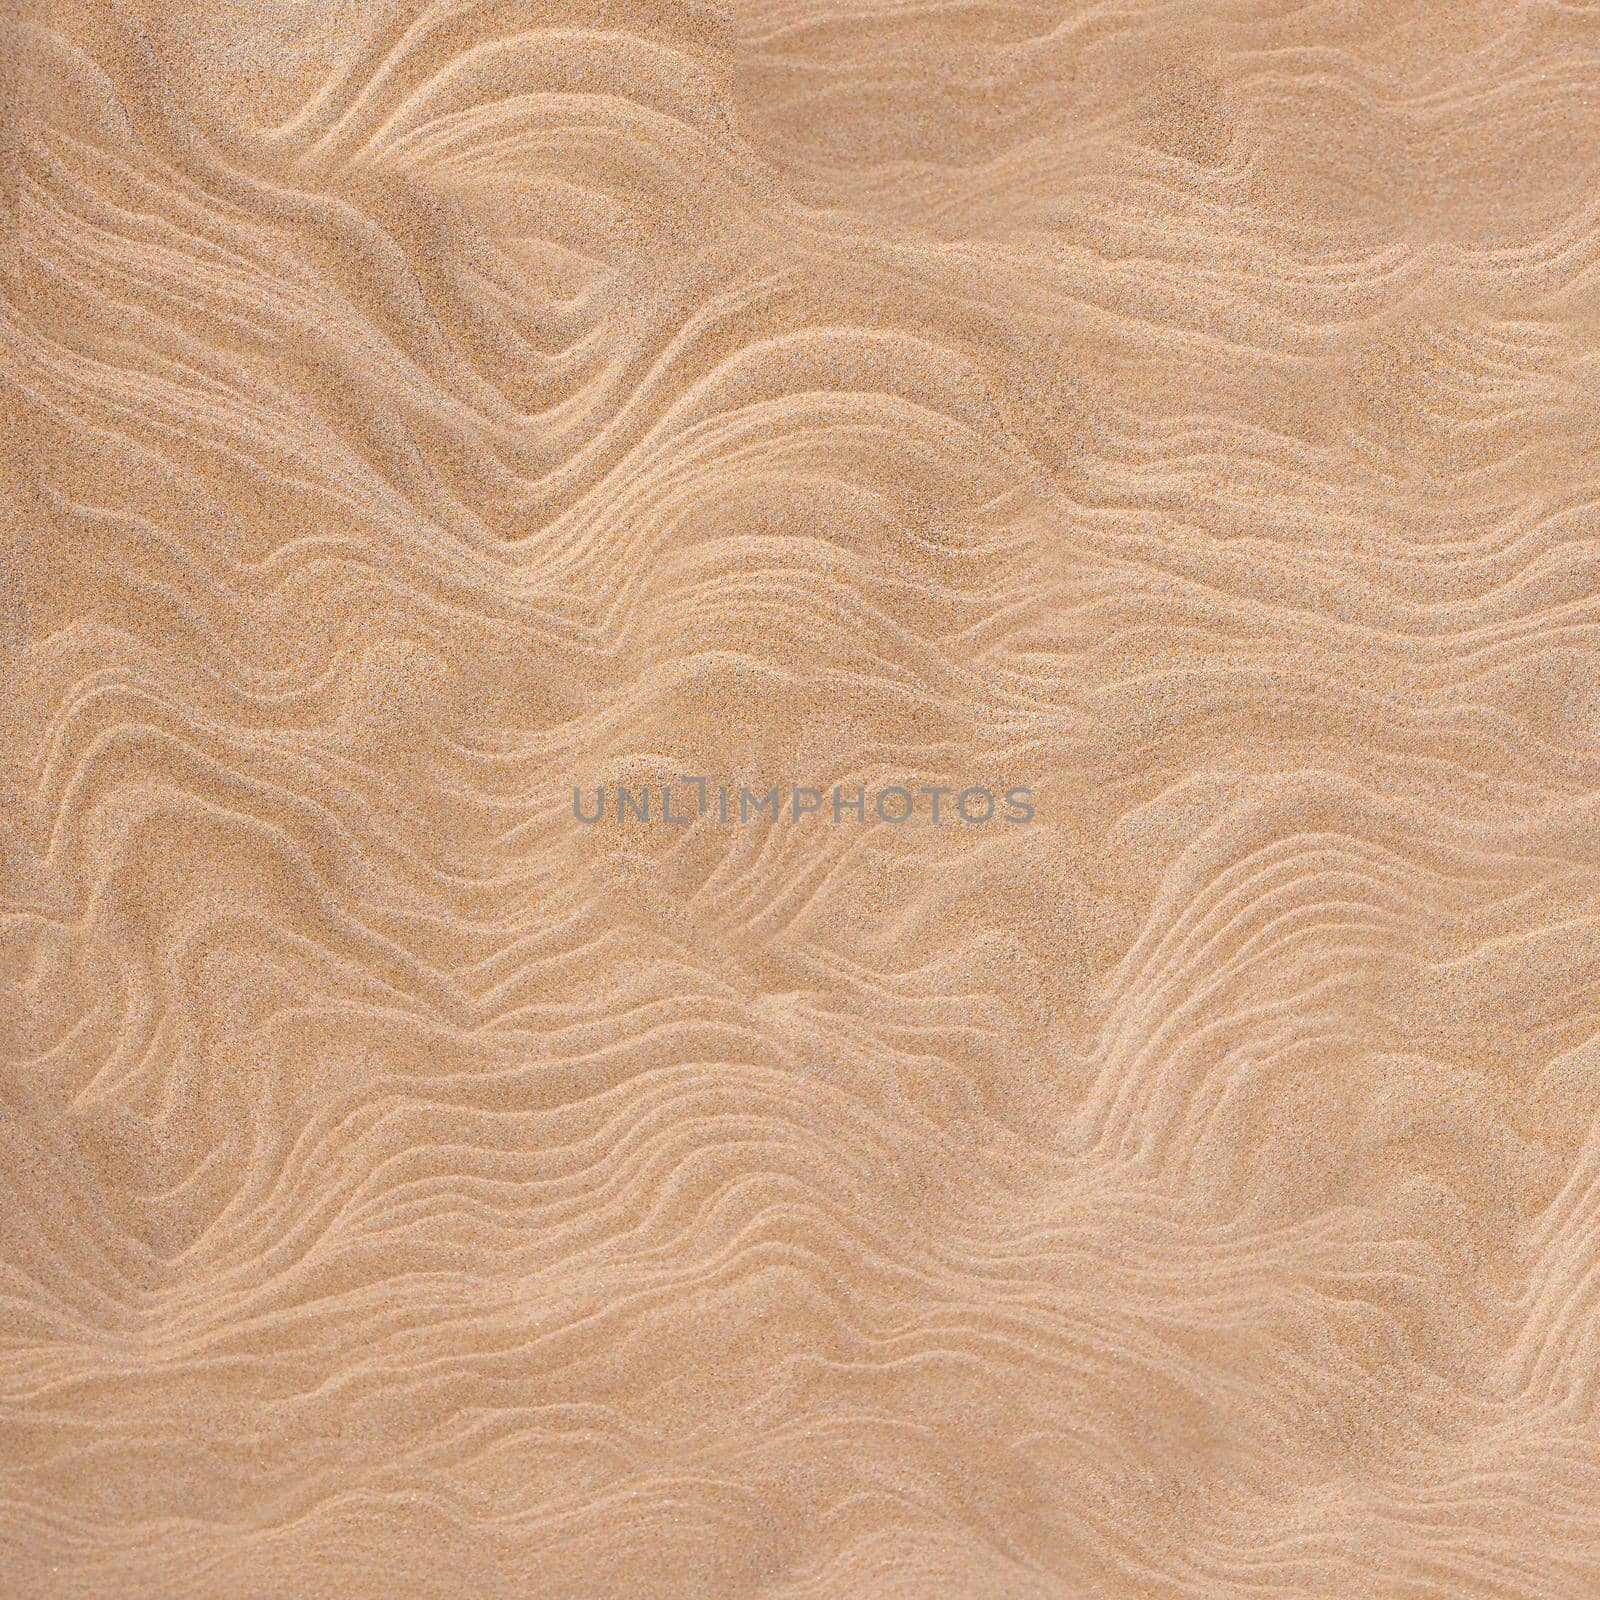 The texture of sand. Sandy beach for background. Top view